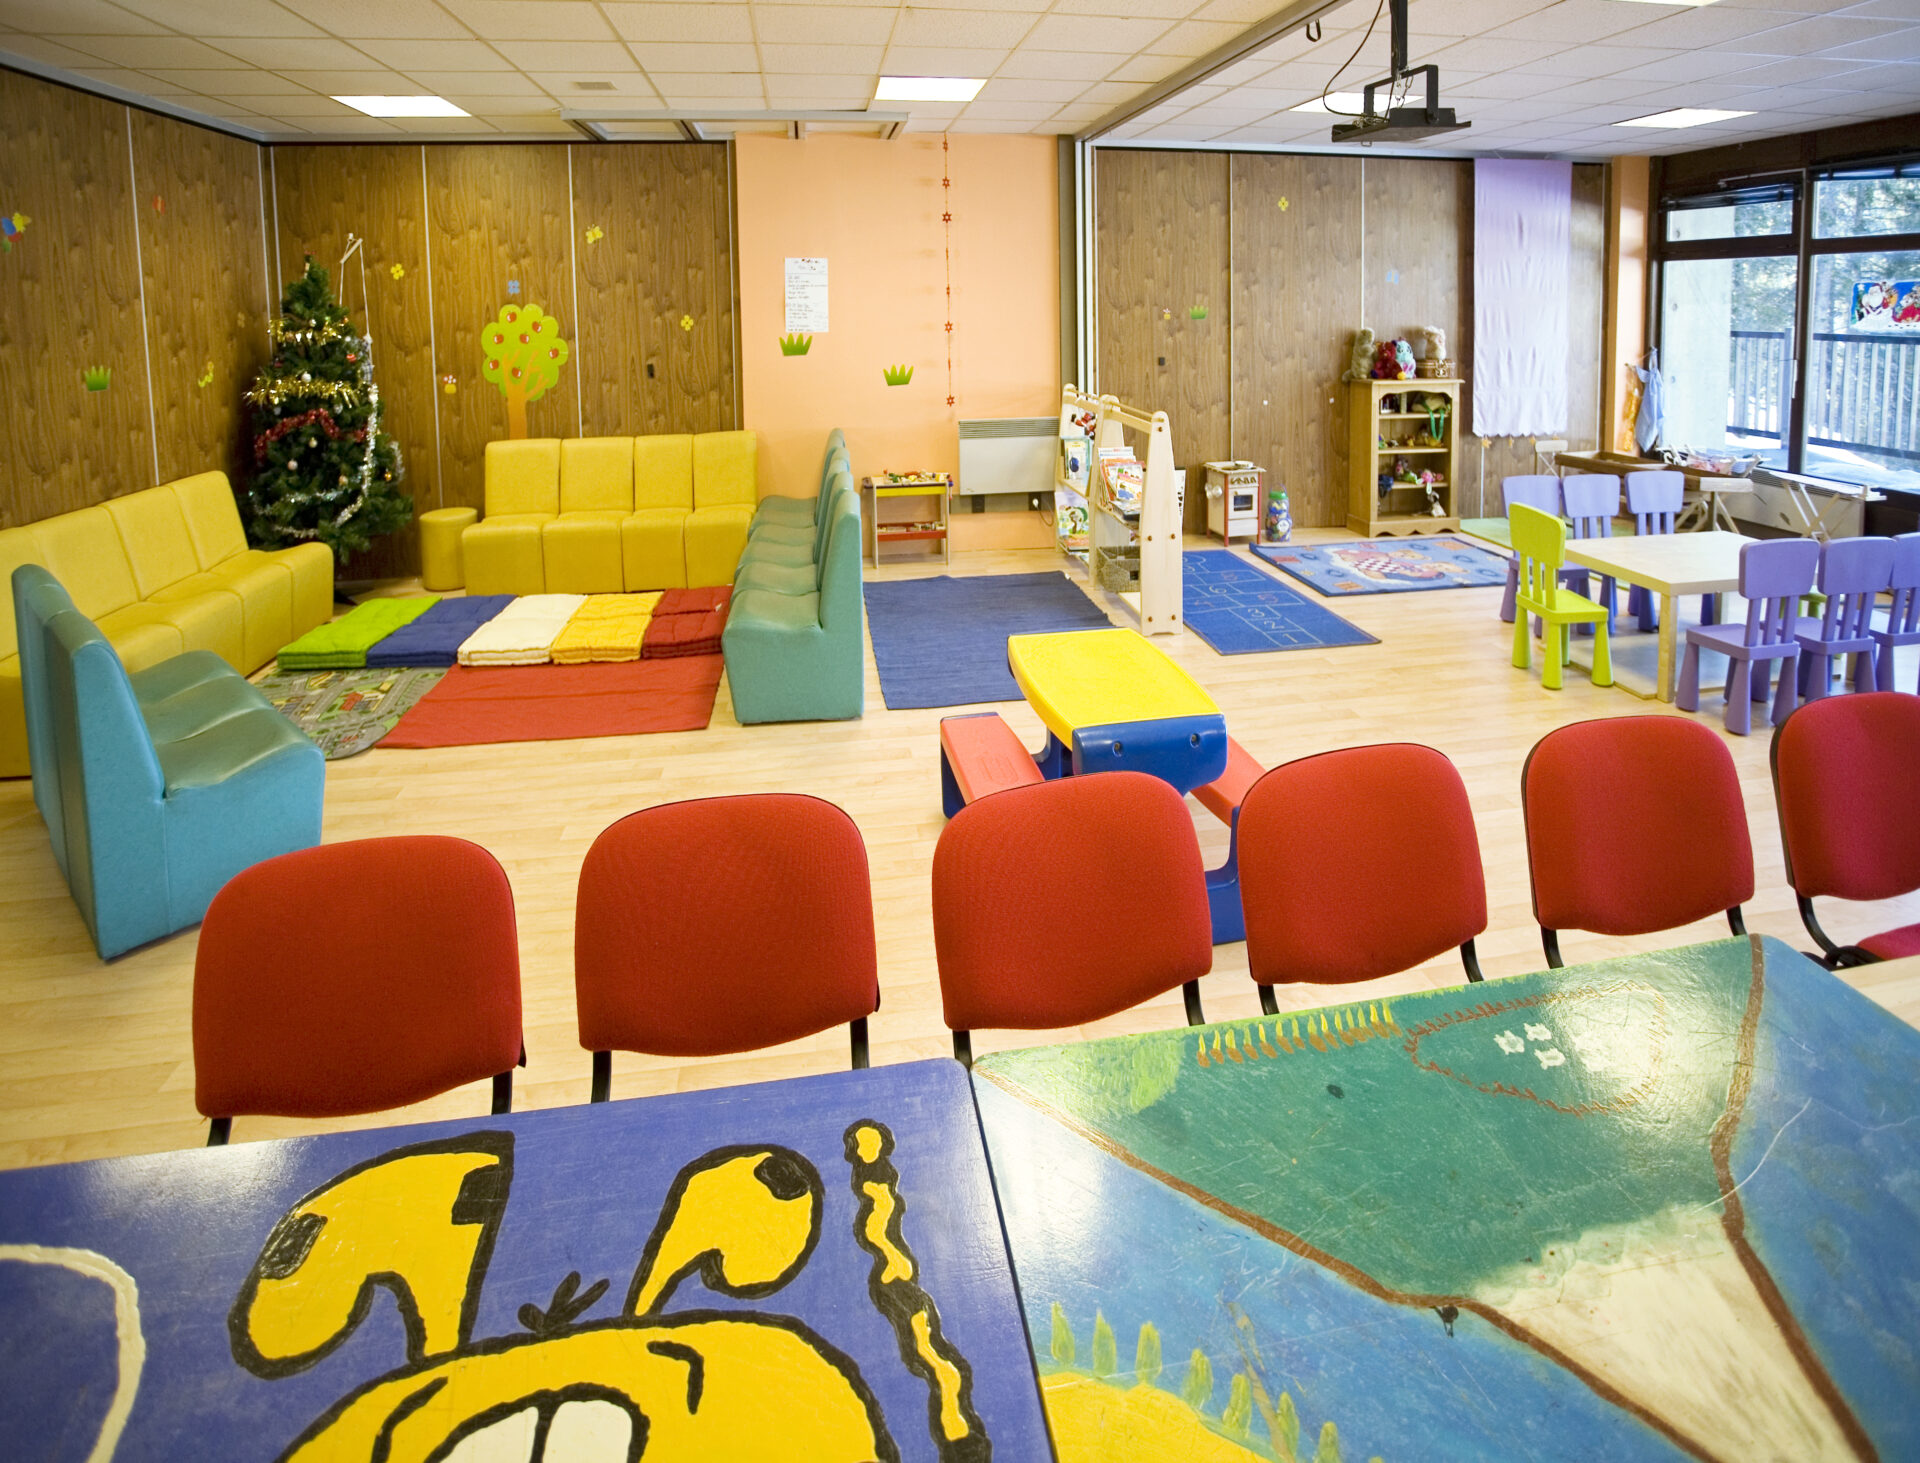 An image of one of the kids clubs